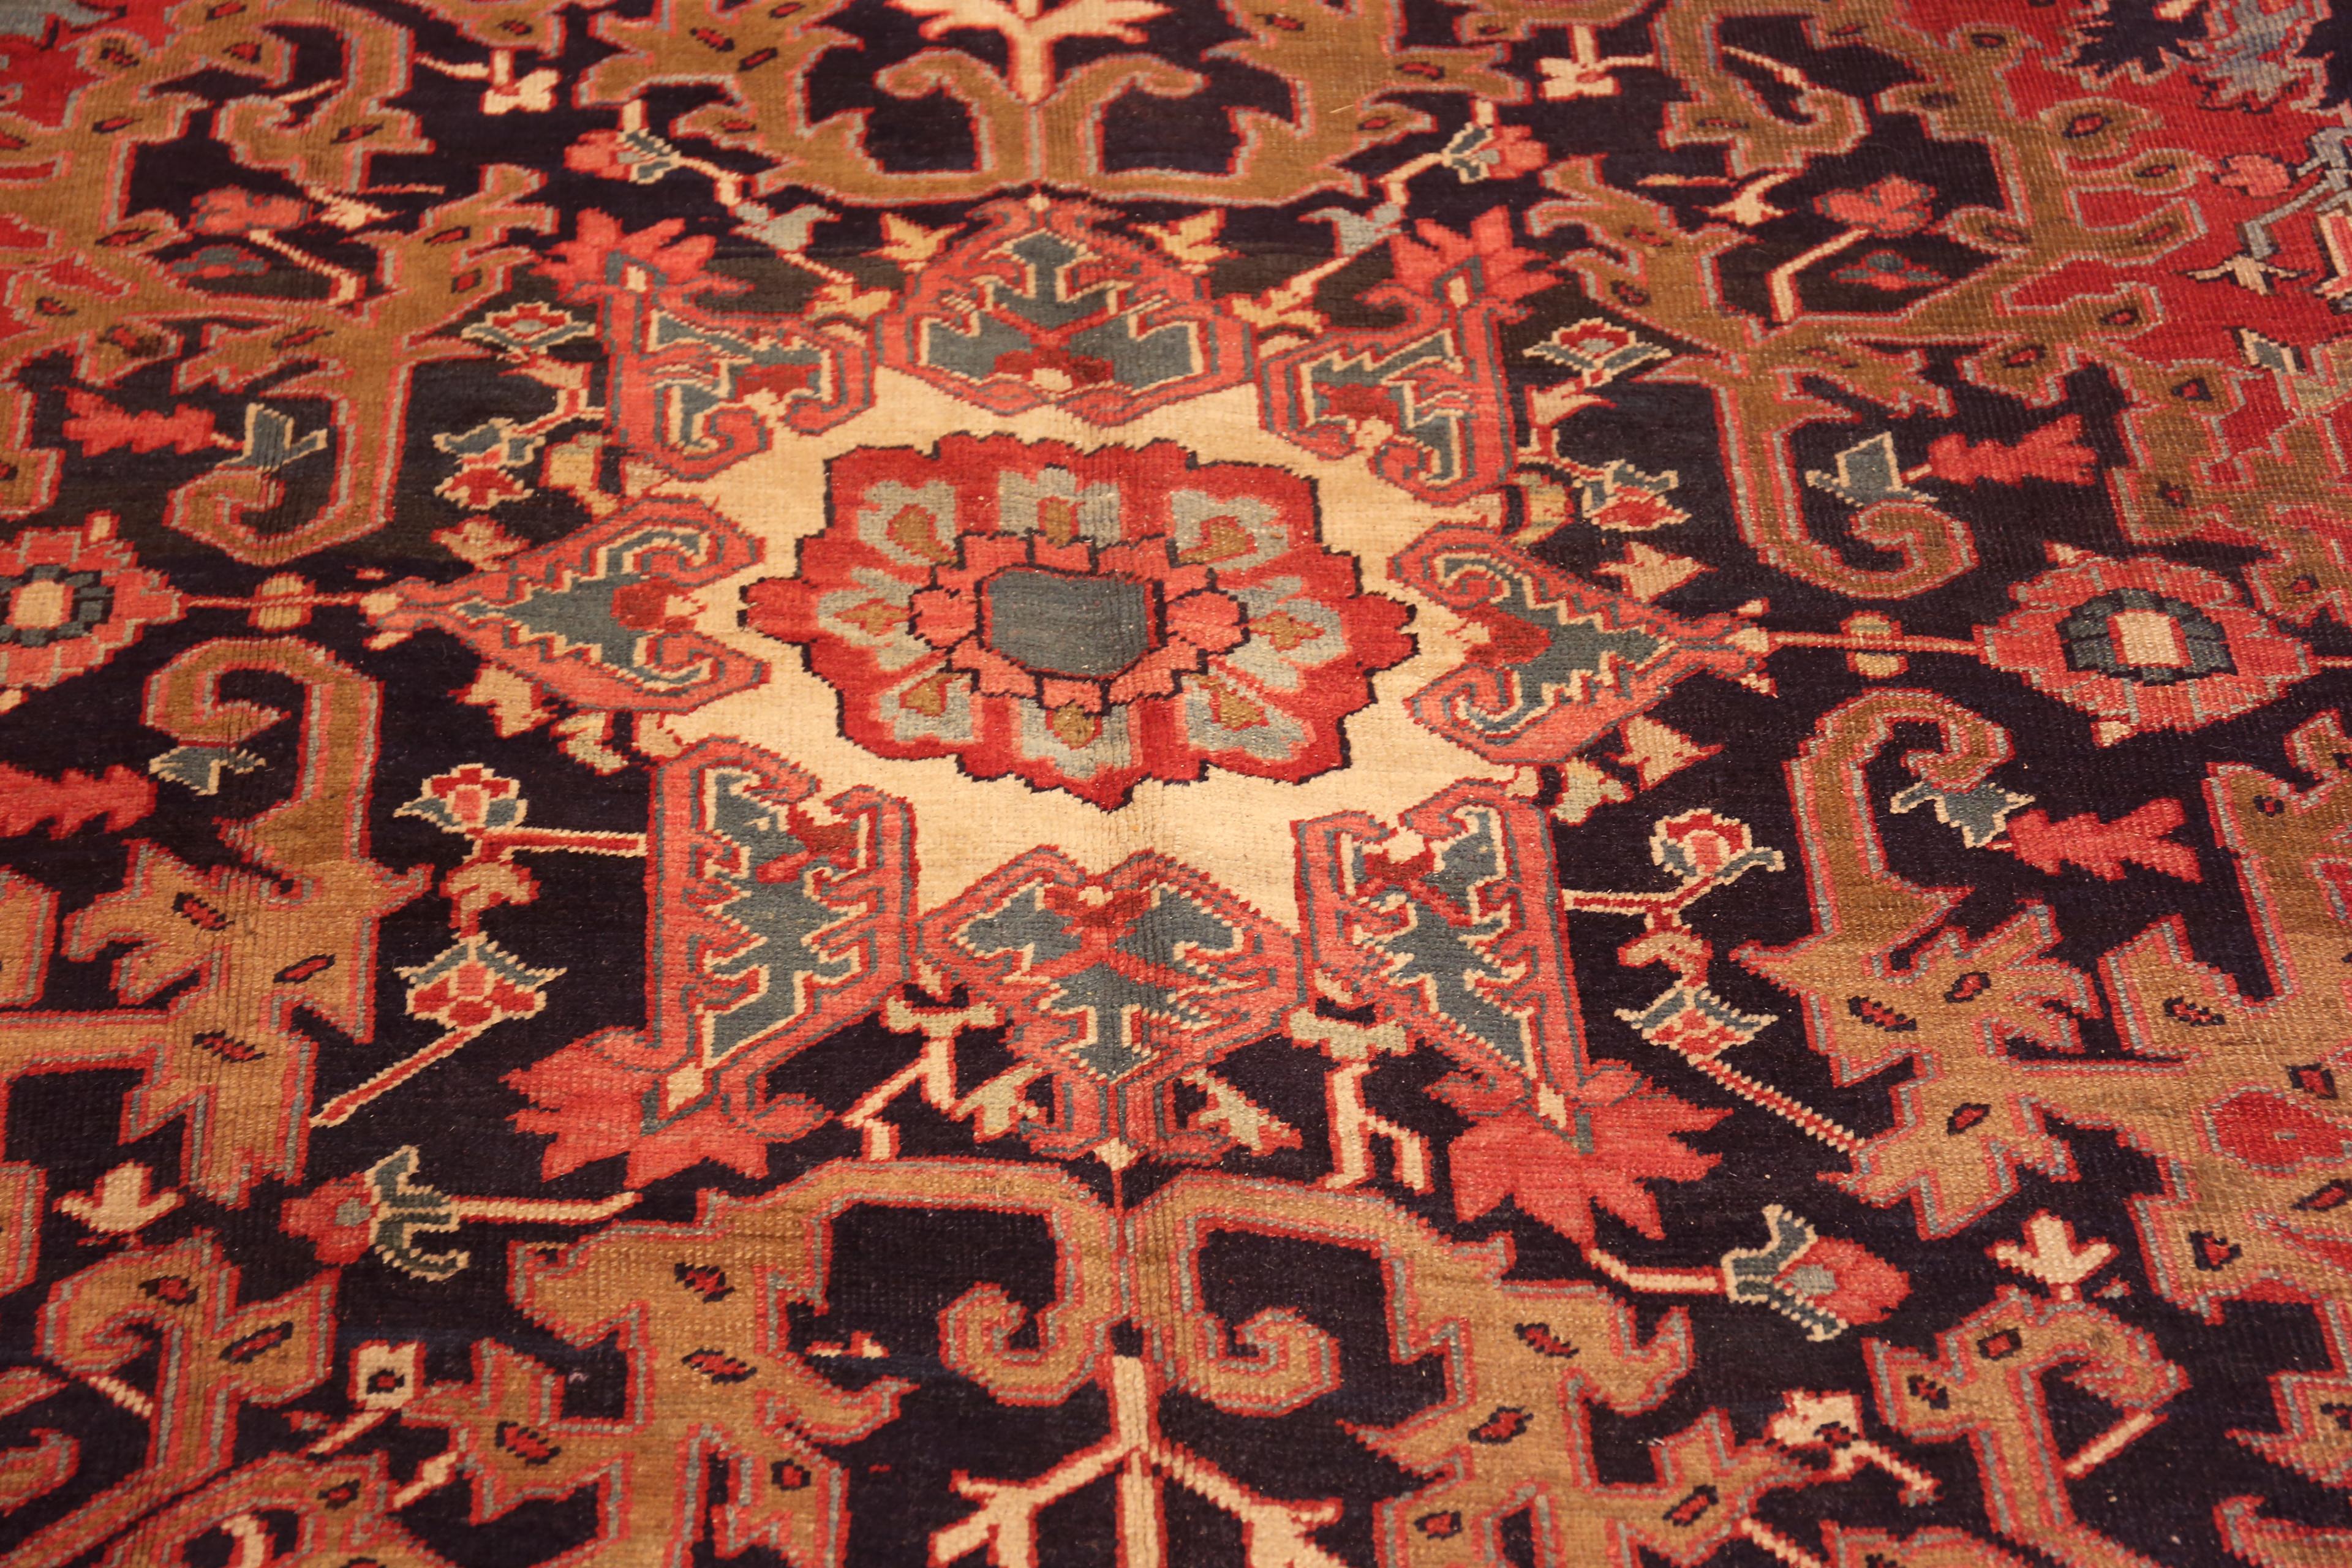 Hand-Knotted Intricate Antique Geometric Medallion Persian Heriz Rug 8'6